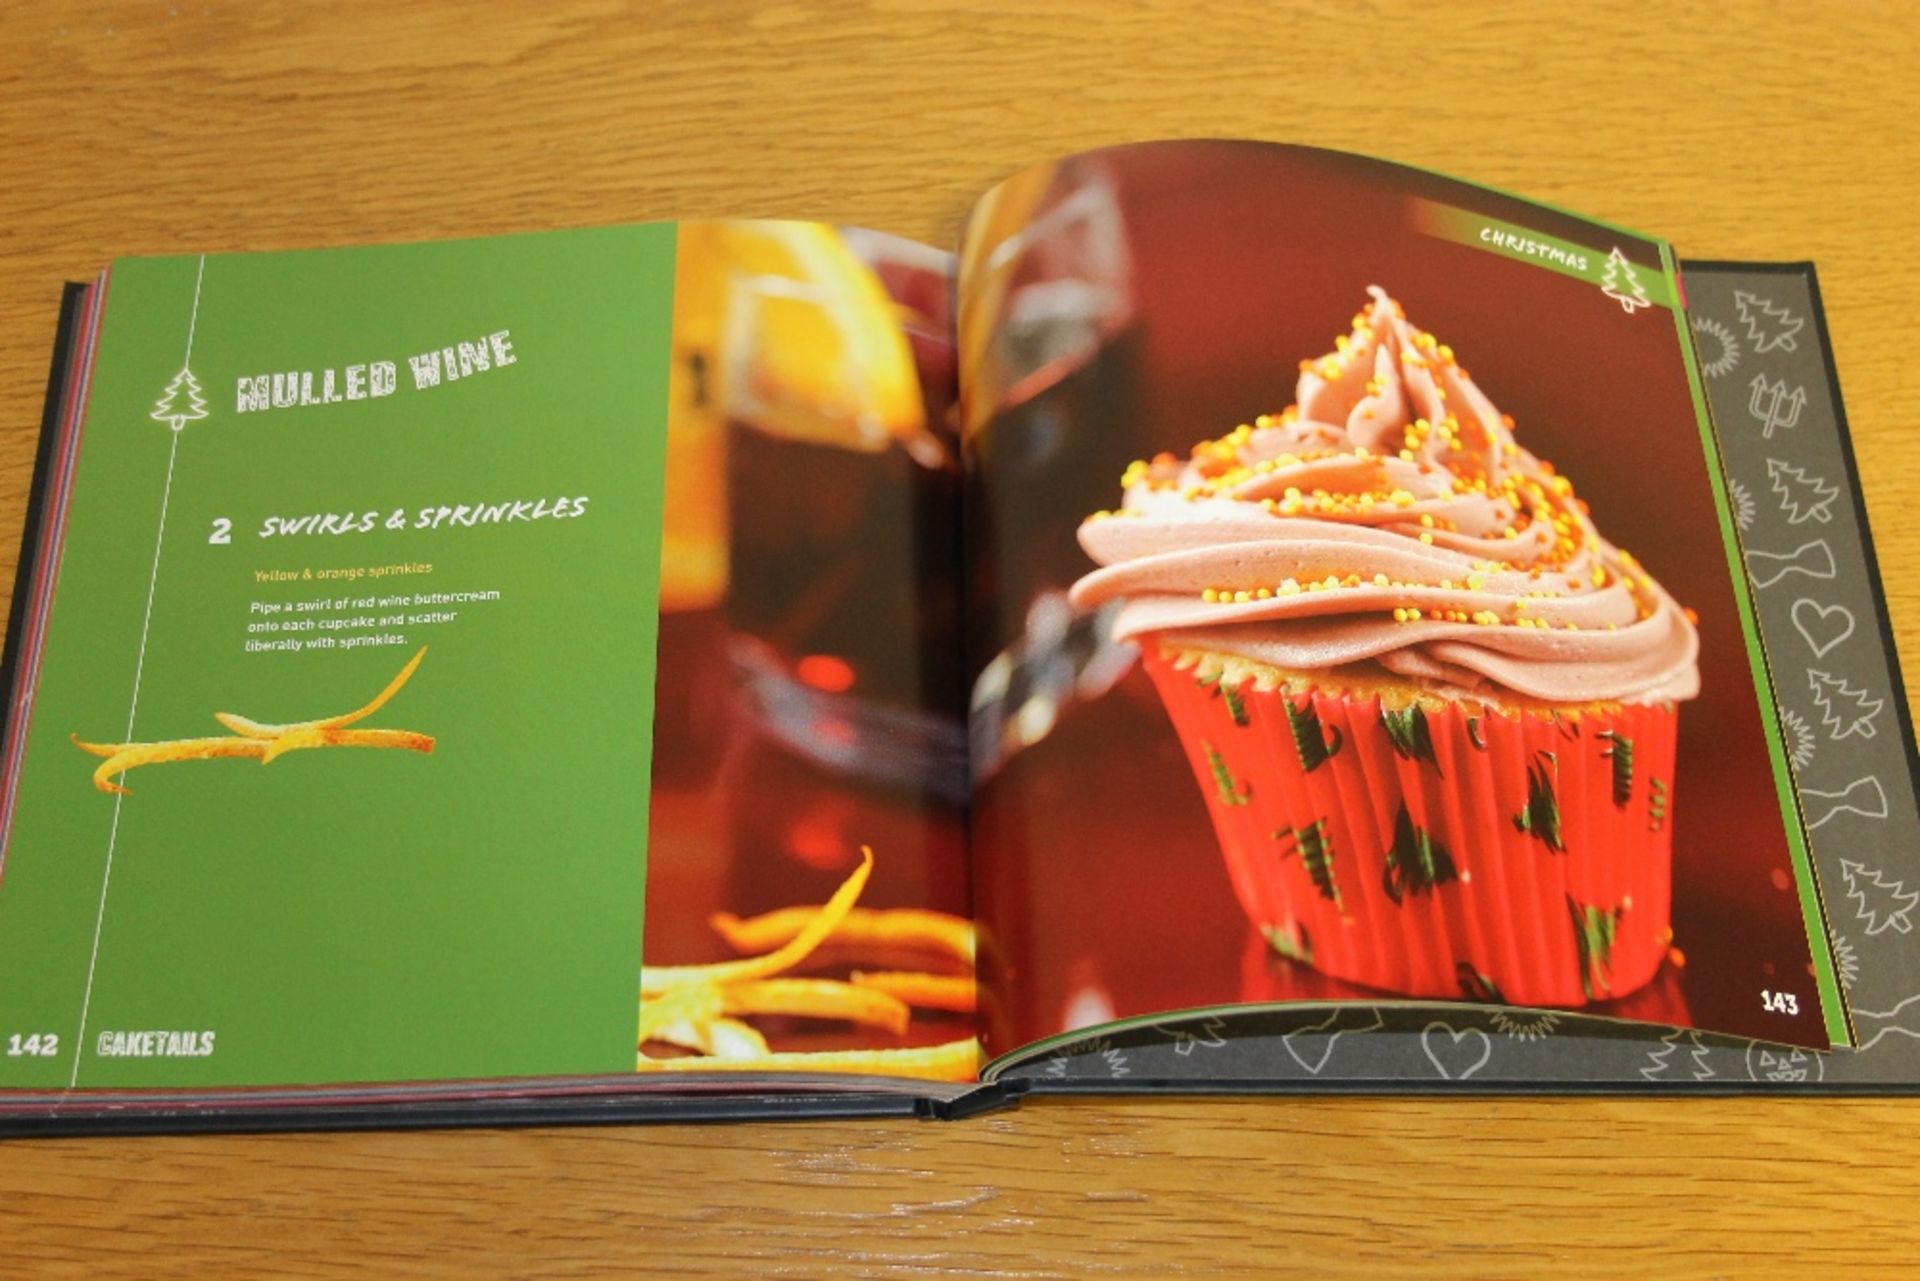 Caketails – Book on Intoxicating Cup Cakes for Grown Ups Pallet of Brand New Books – Approximately - Image 2 of 3